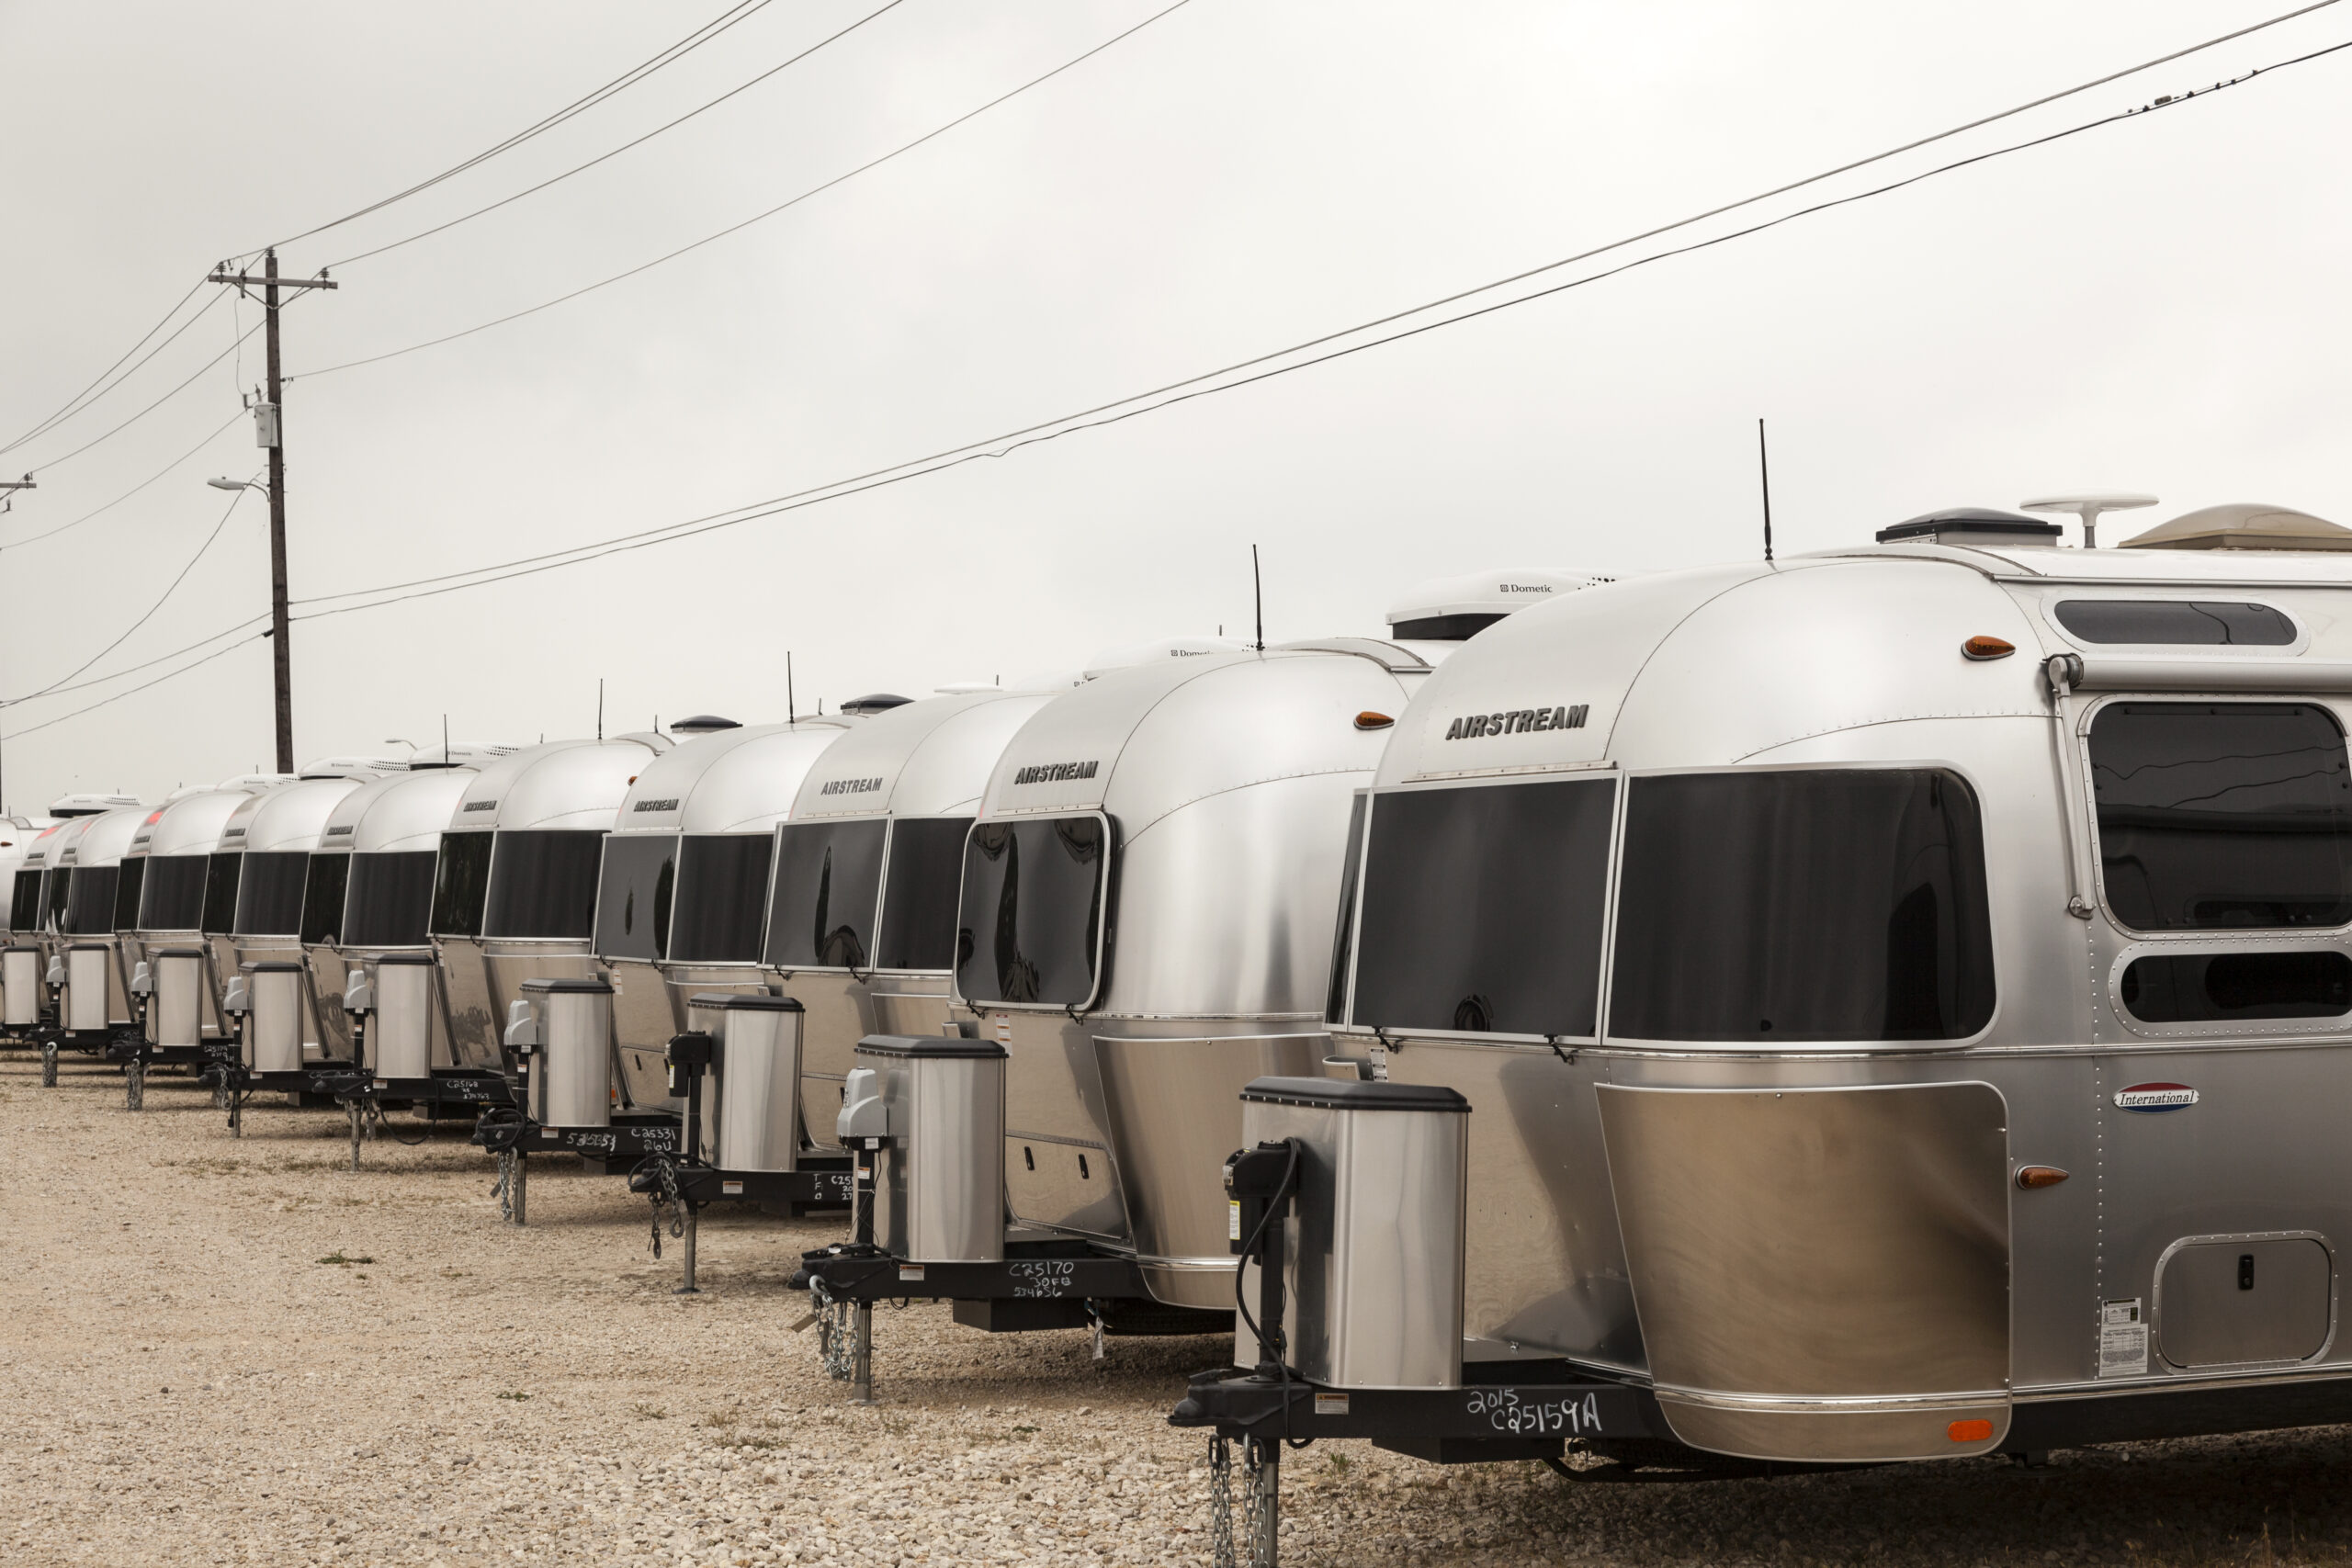 AUSTIN, USA - APR 11: Row of new luxury american Airstream trailers at a dealership in Texas. April 11, 2016 in Austin, Texas, United States